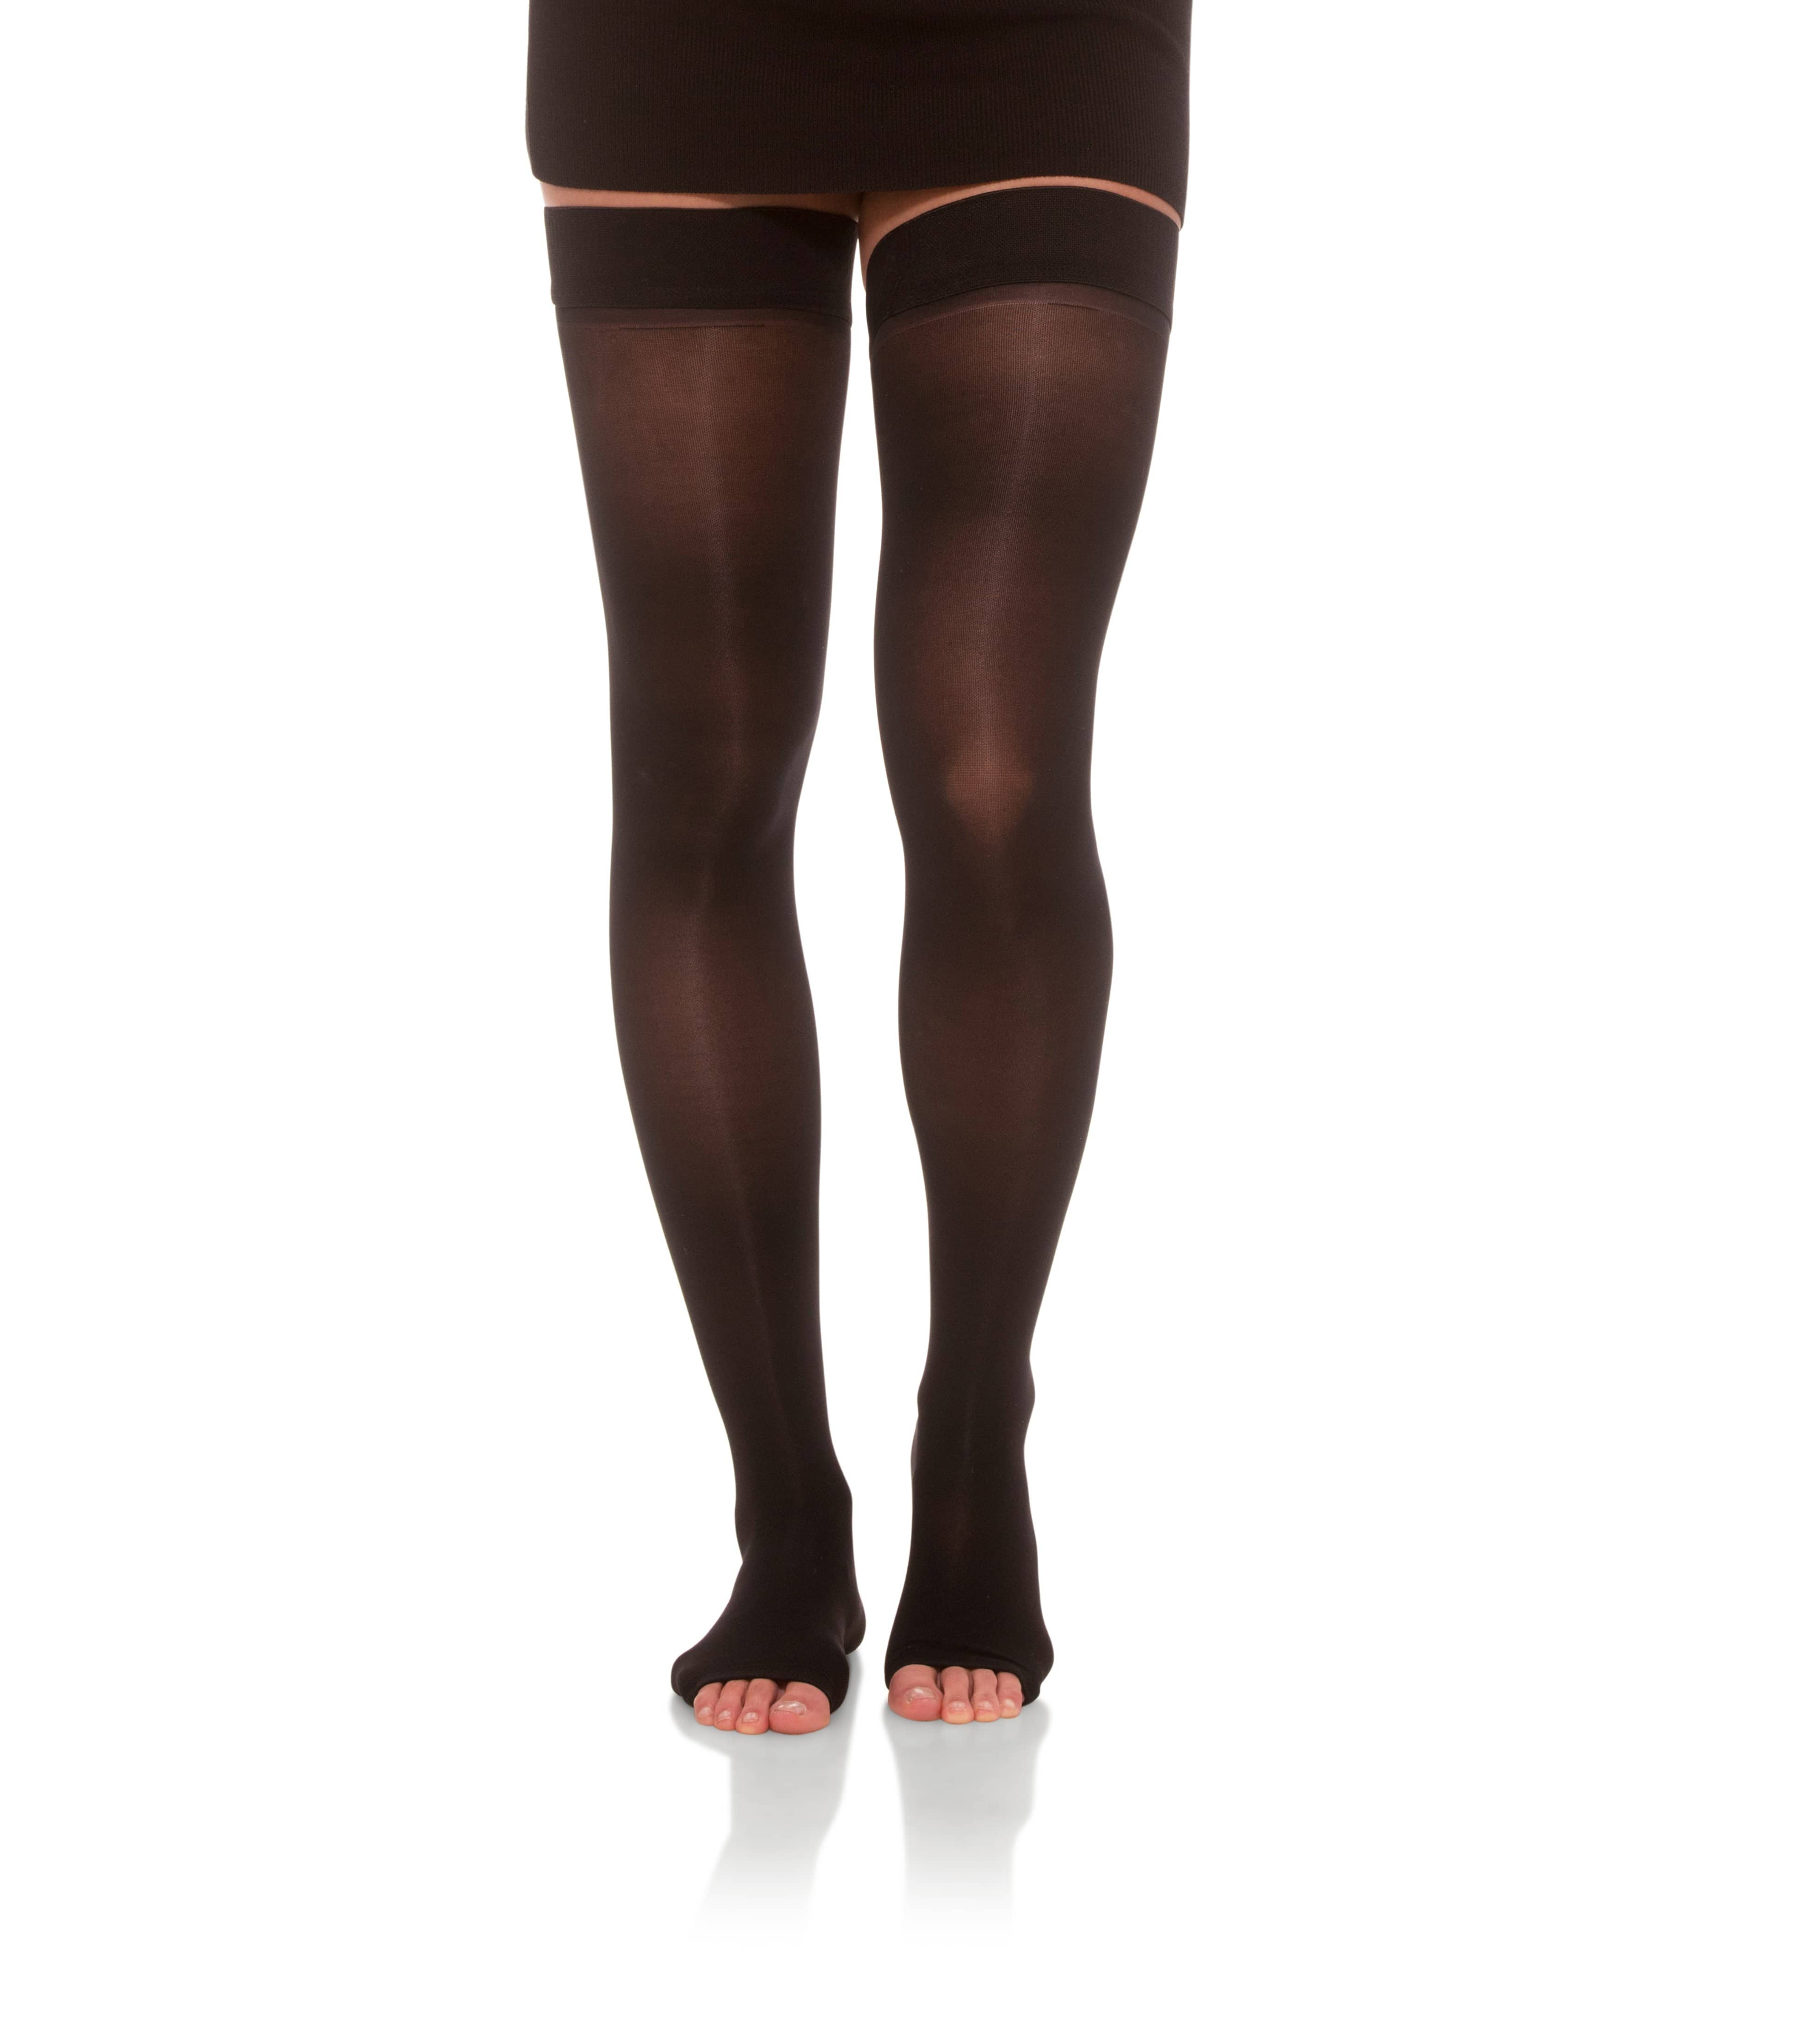 Thigh High Compression Stockings 15 20mmhg Sheer Open Toe 152 